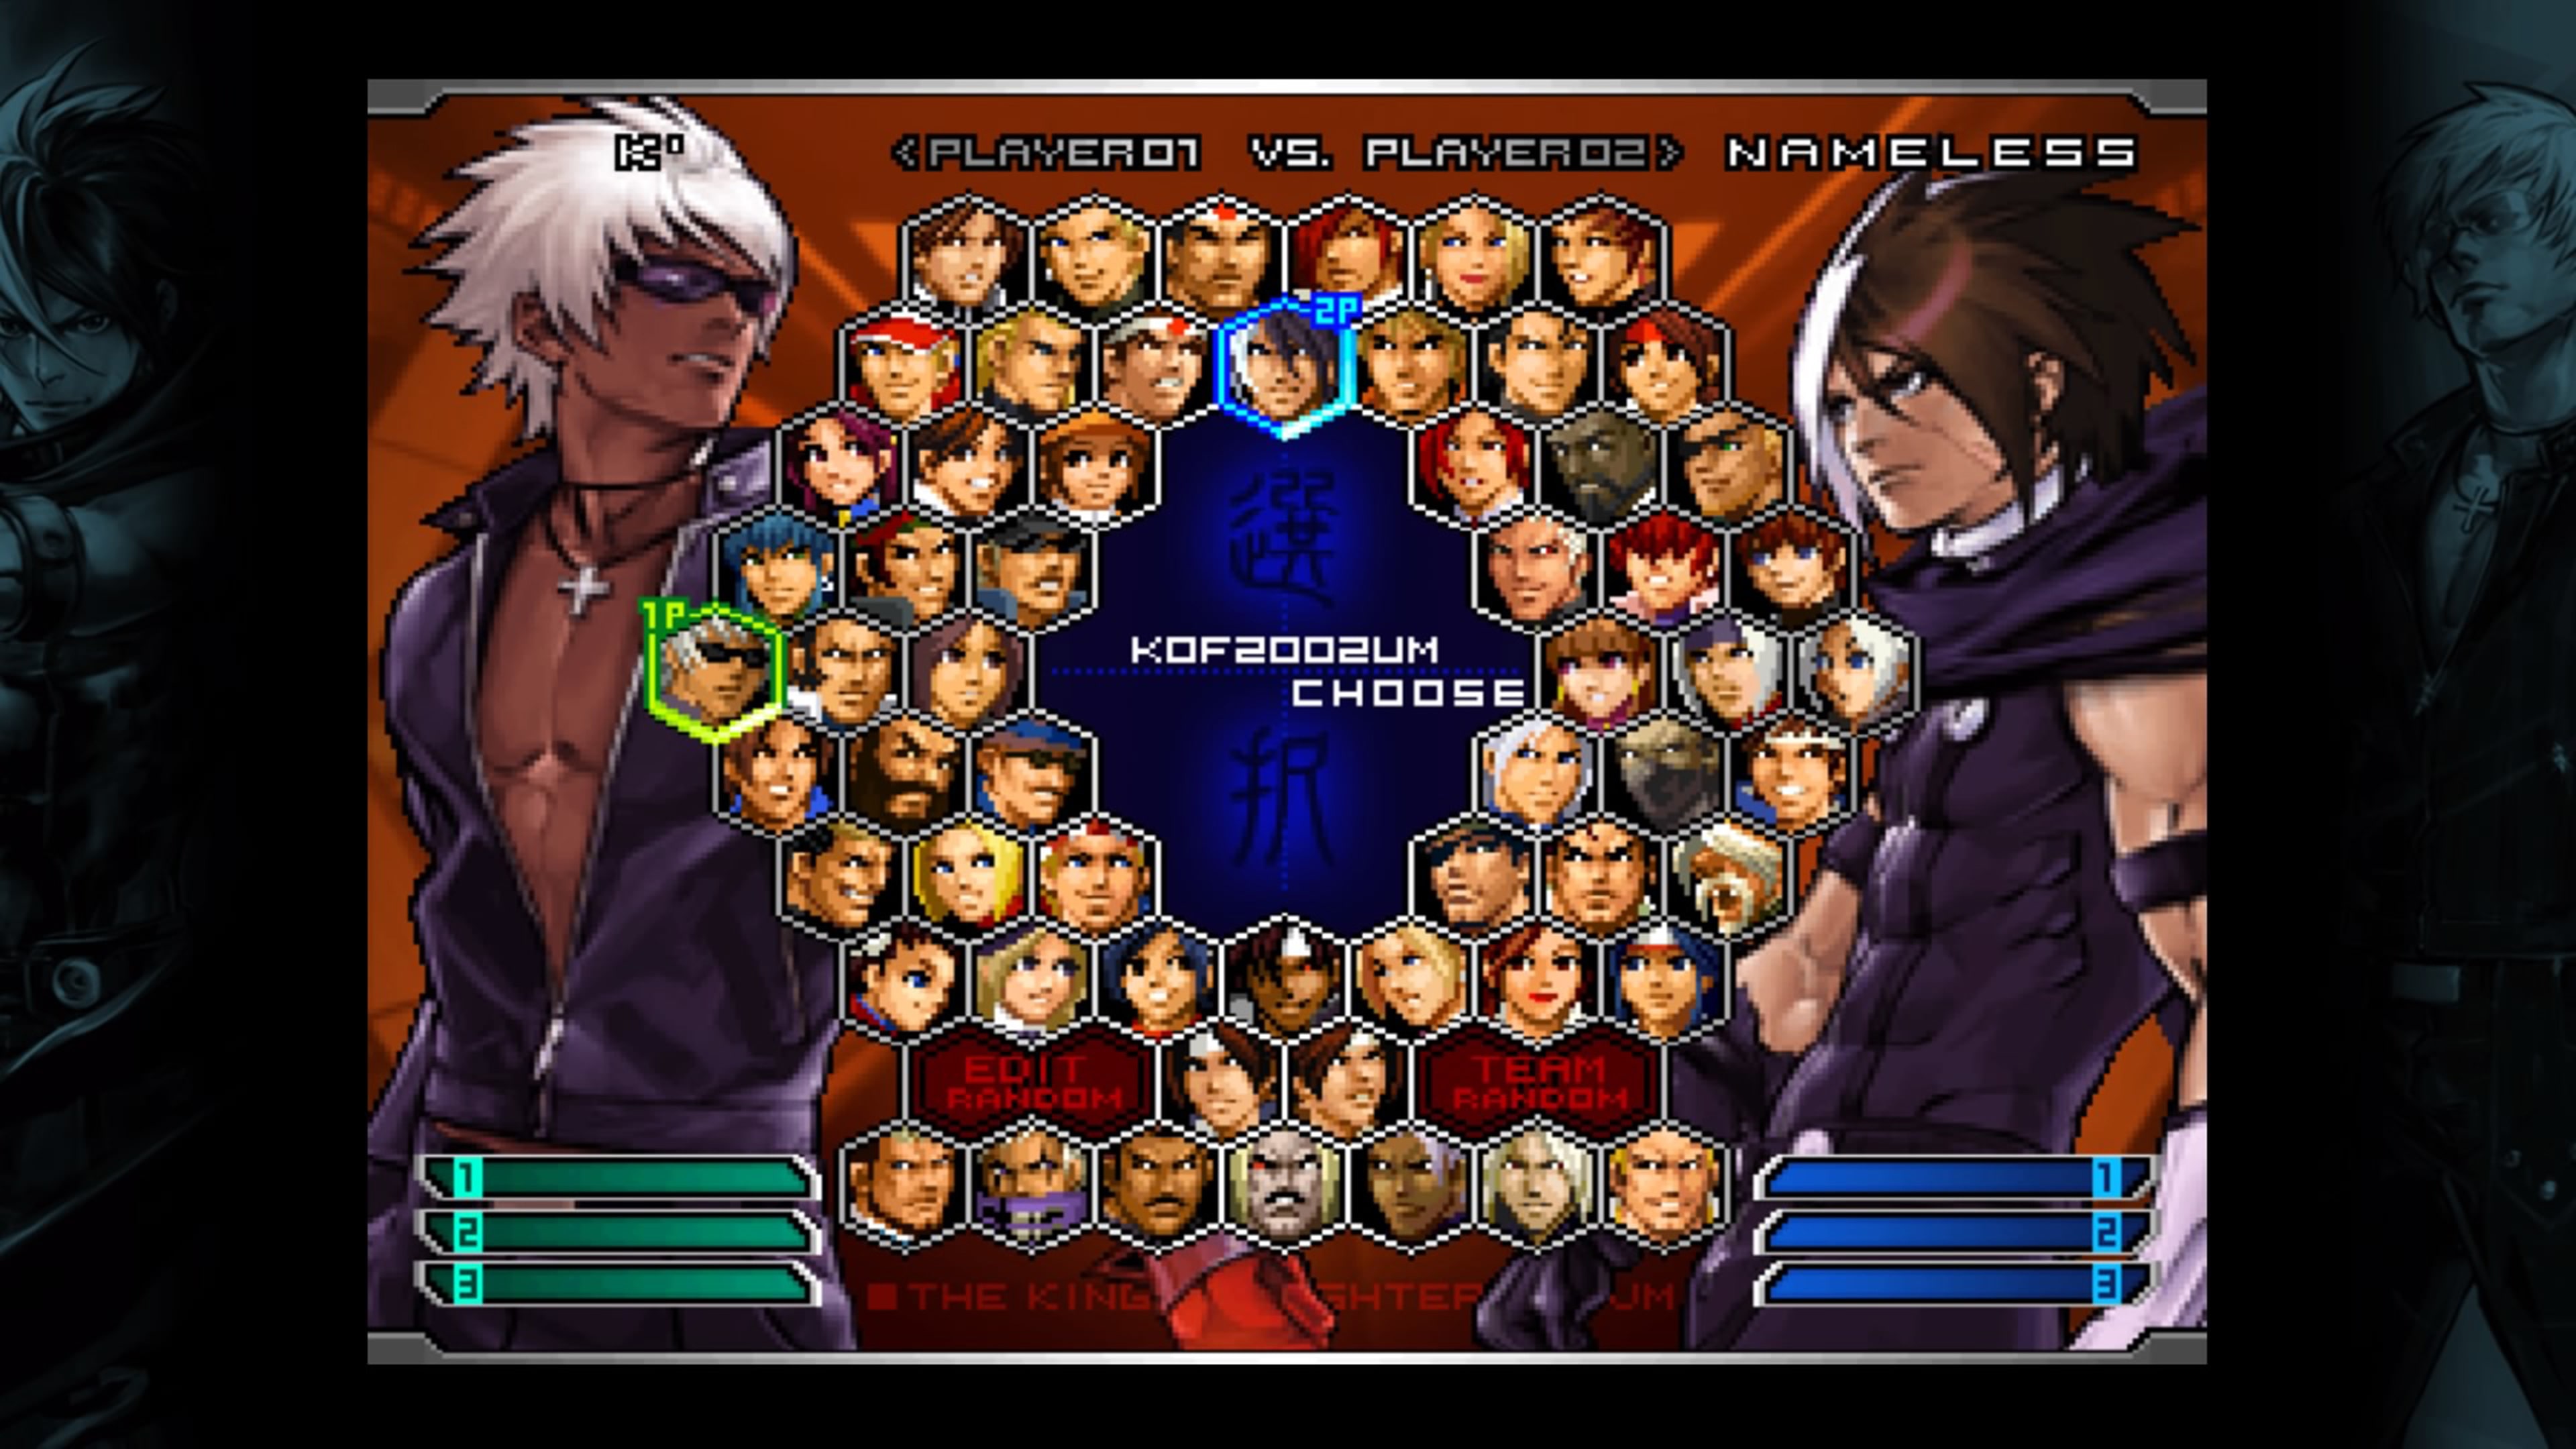 2002 Unlimted Match is the undisputed King of Fighters! Thanks to